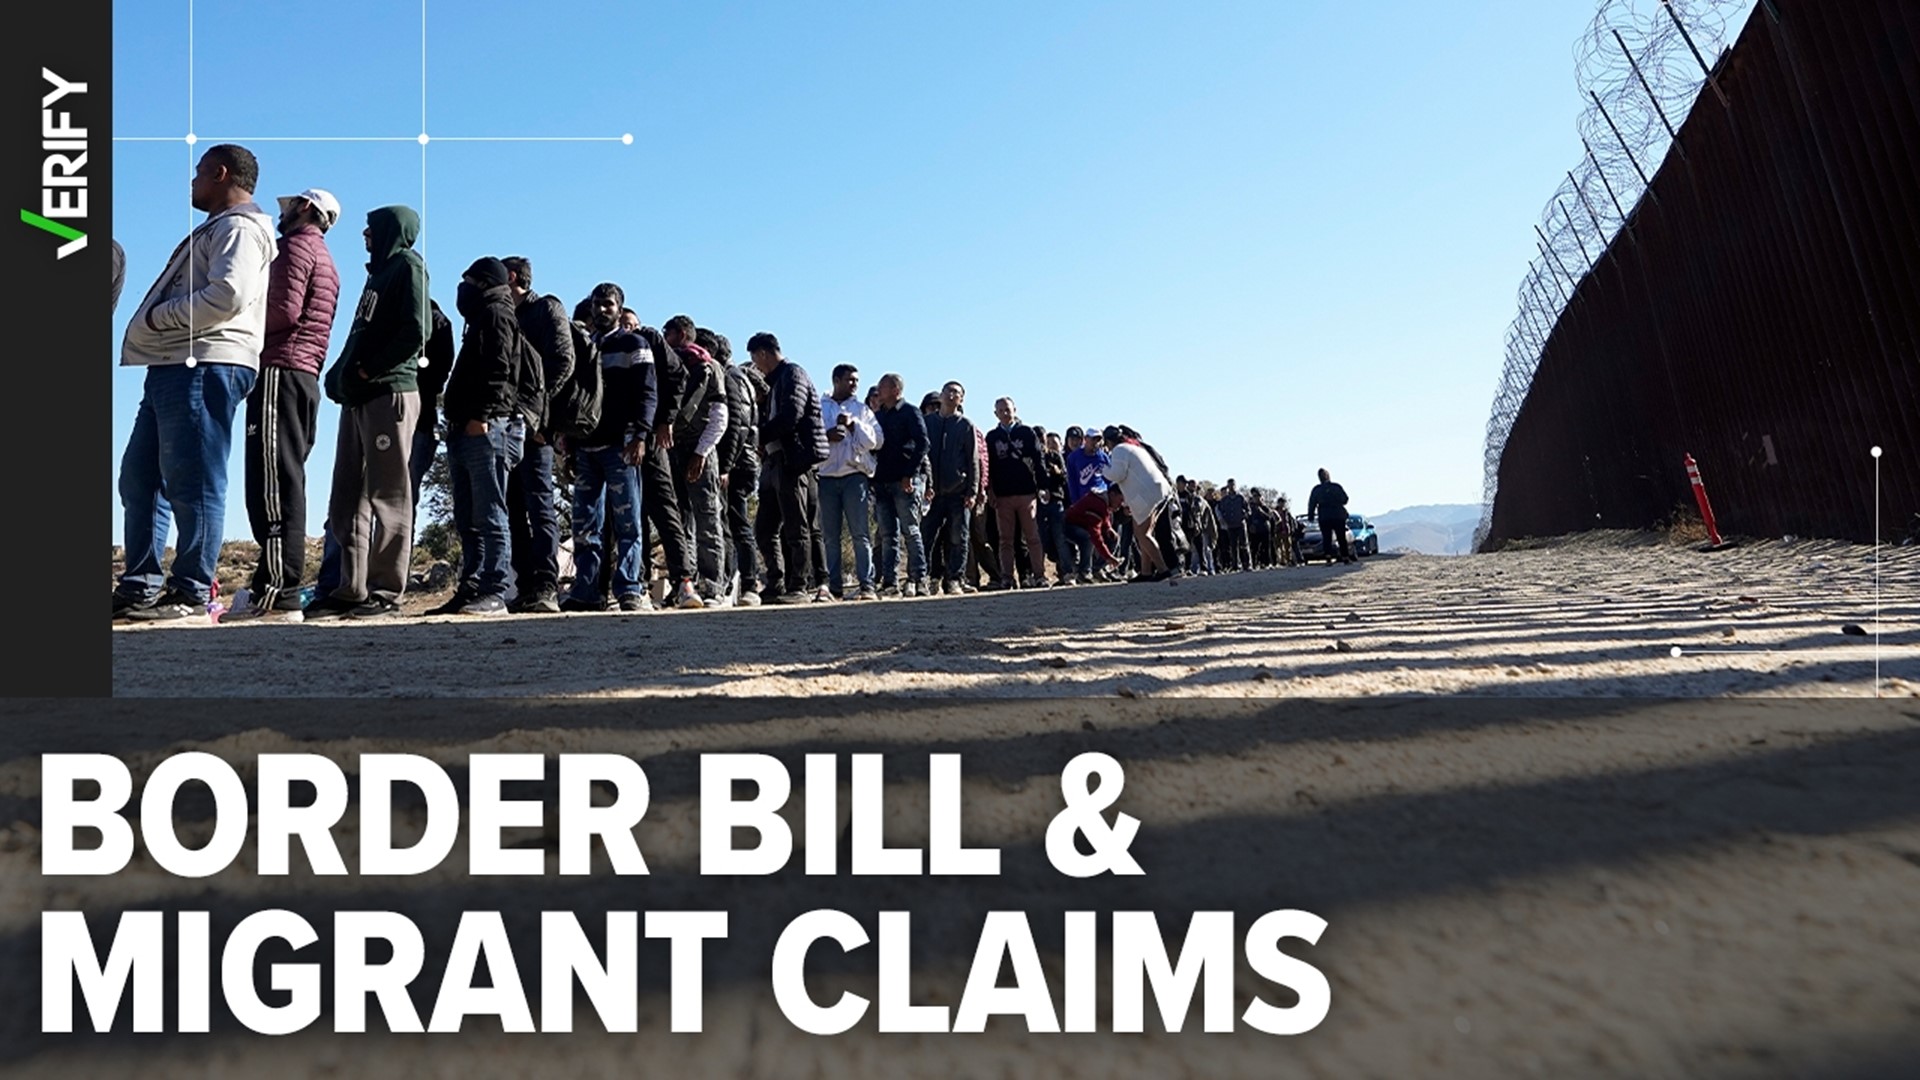 Claims that the bipartisan border bill that failed to pass in the Senate would let 5,000 migrants into the U.S. per day are misleading. Here’s why.